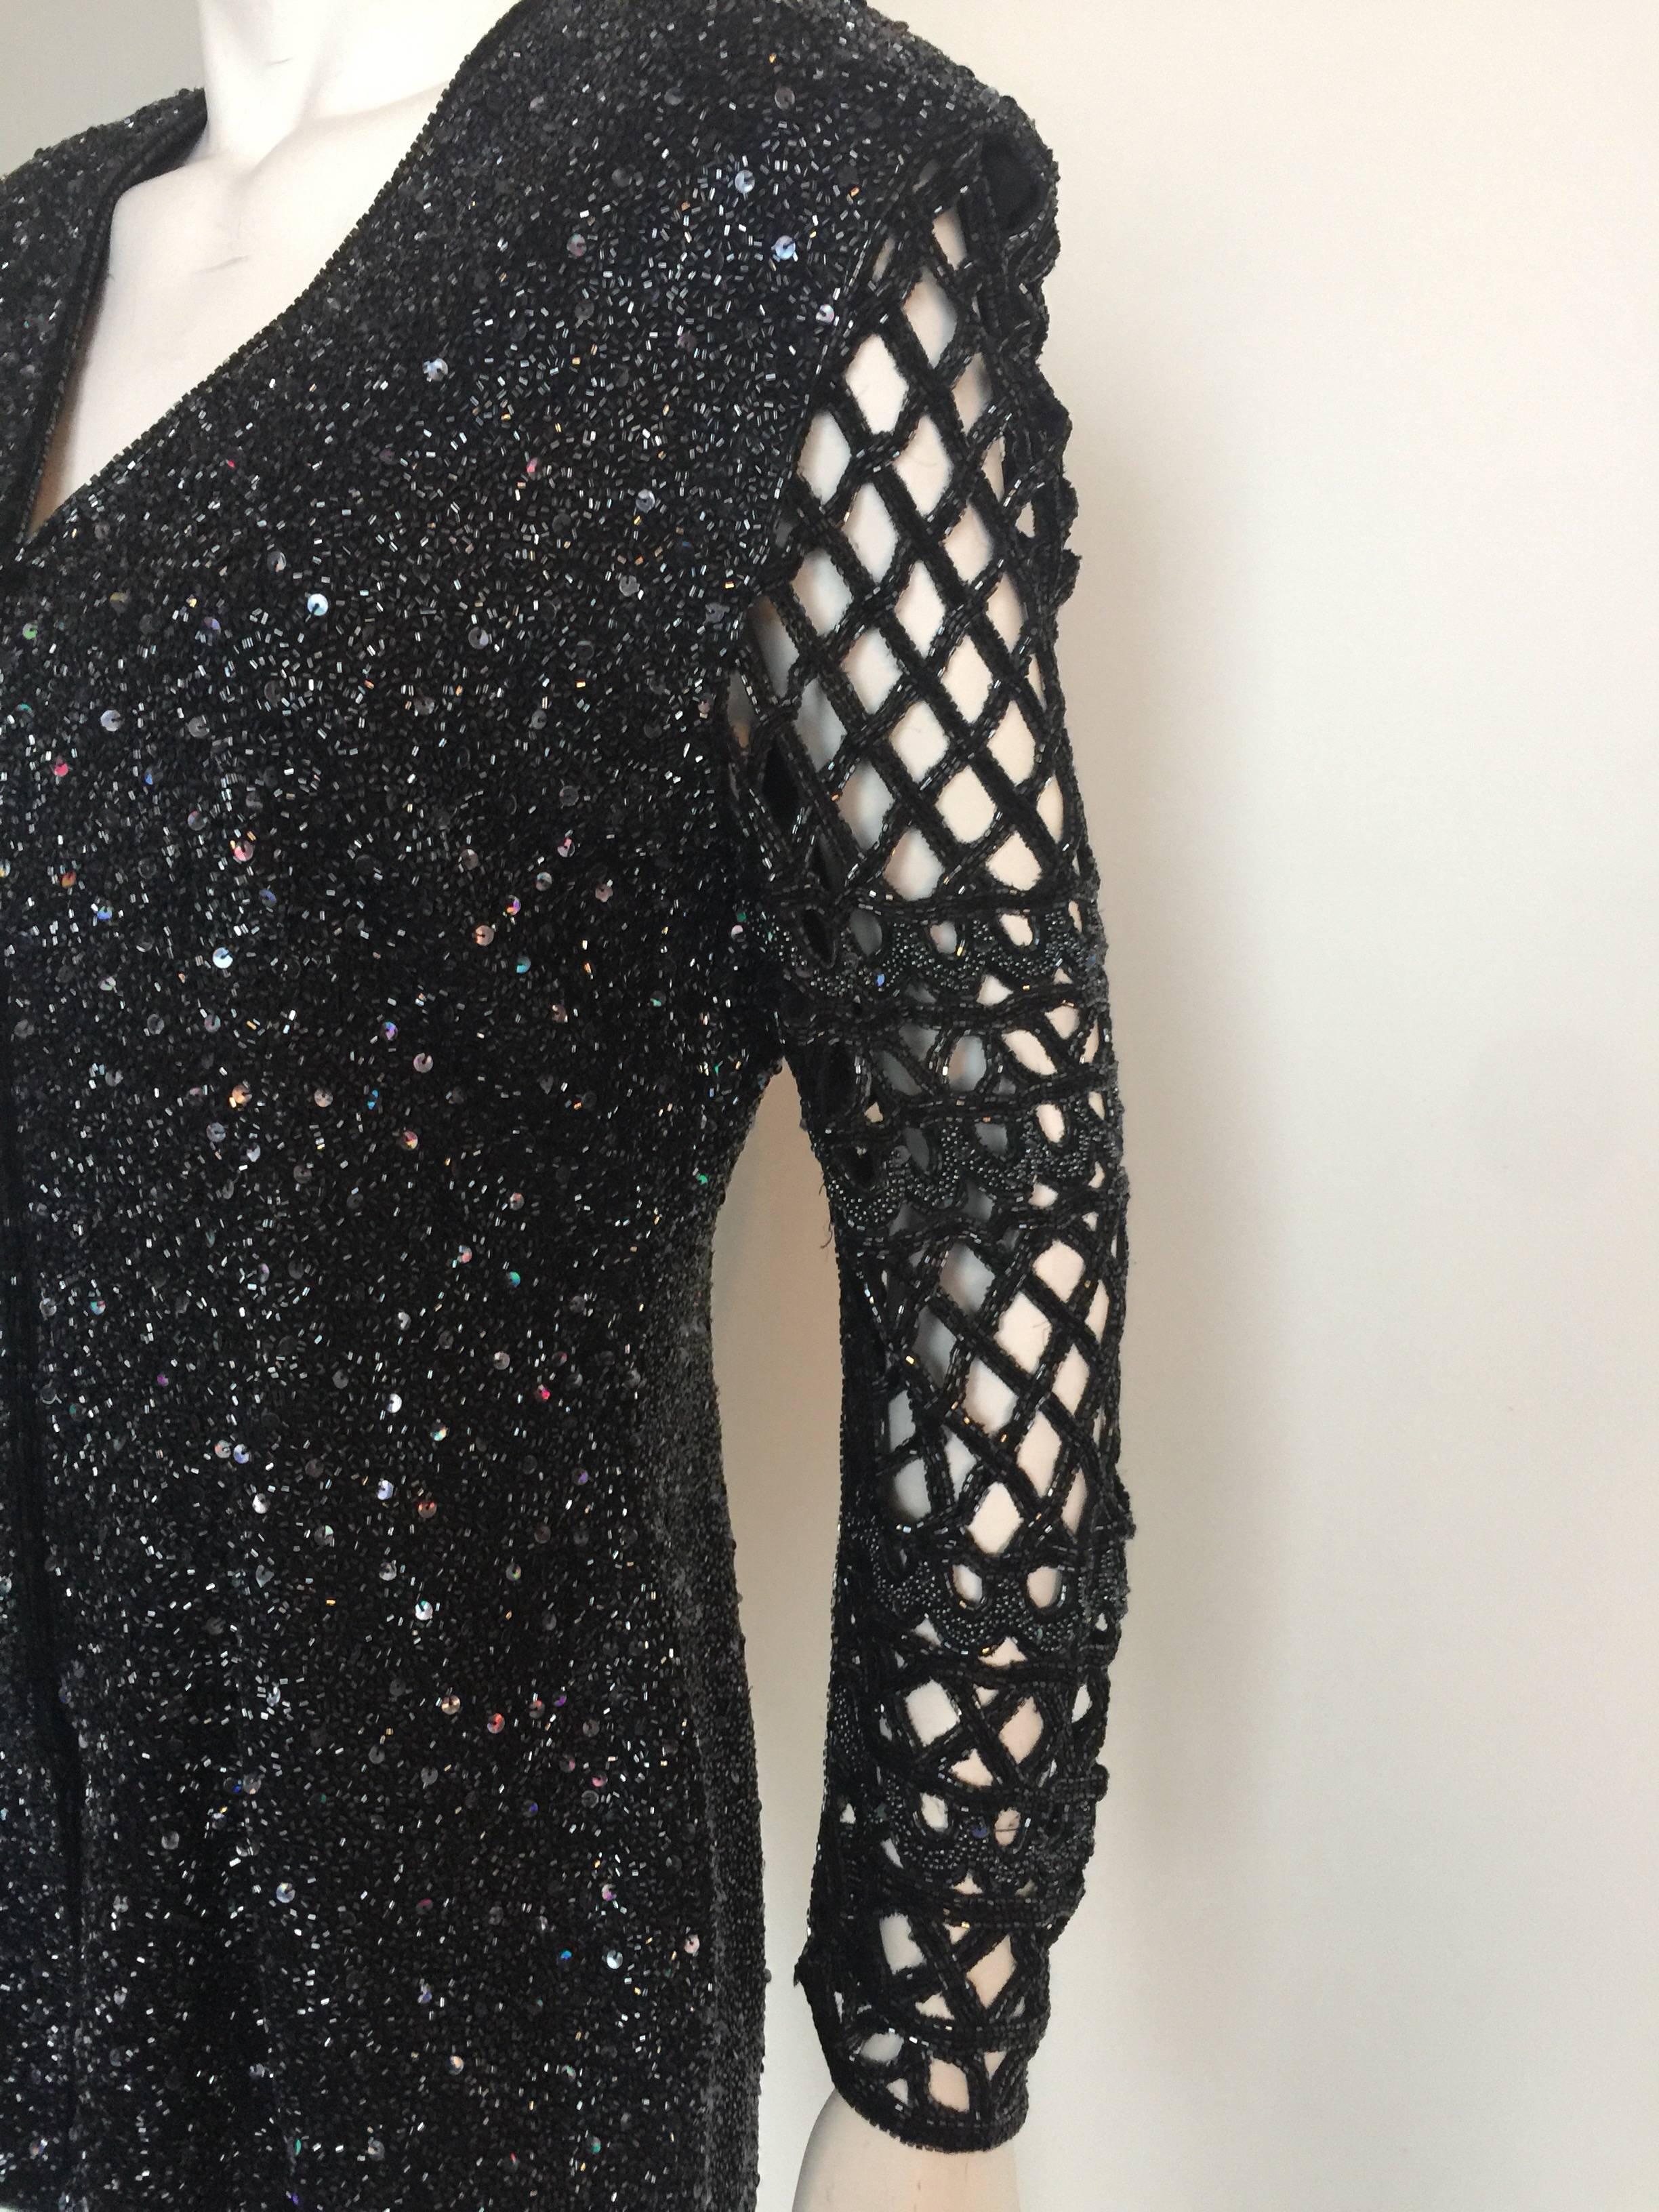 Thi fully beaded black jacket has a beaded cut out design sleeve and a front zipper.  It is a unique piece.  It is in excellent condition and in the light the black beading almost looks charcoal grey.  